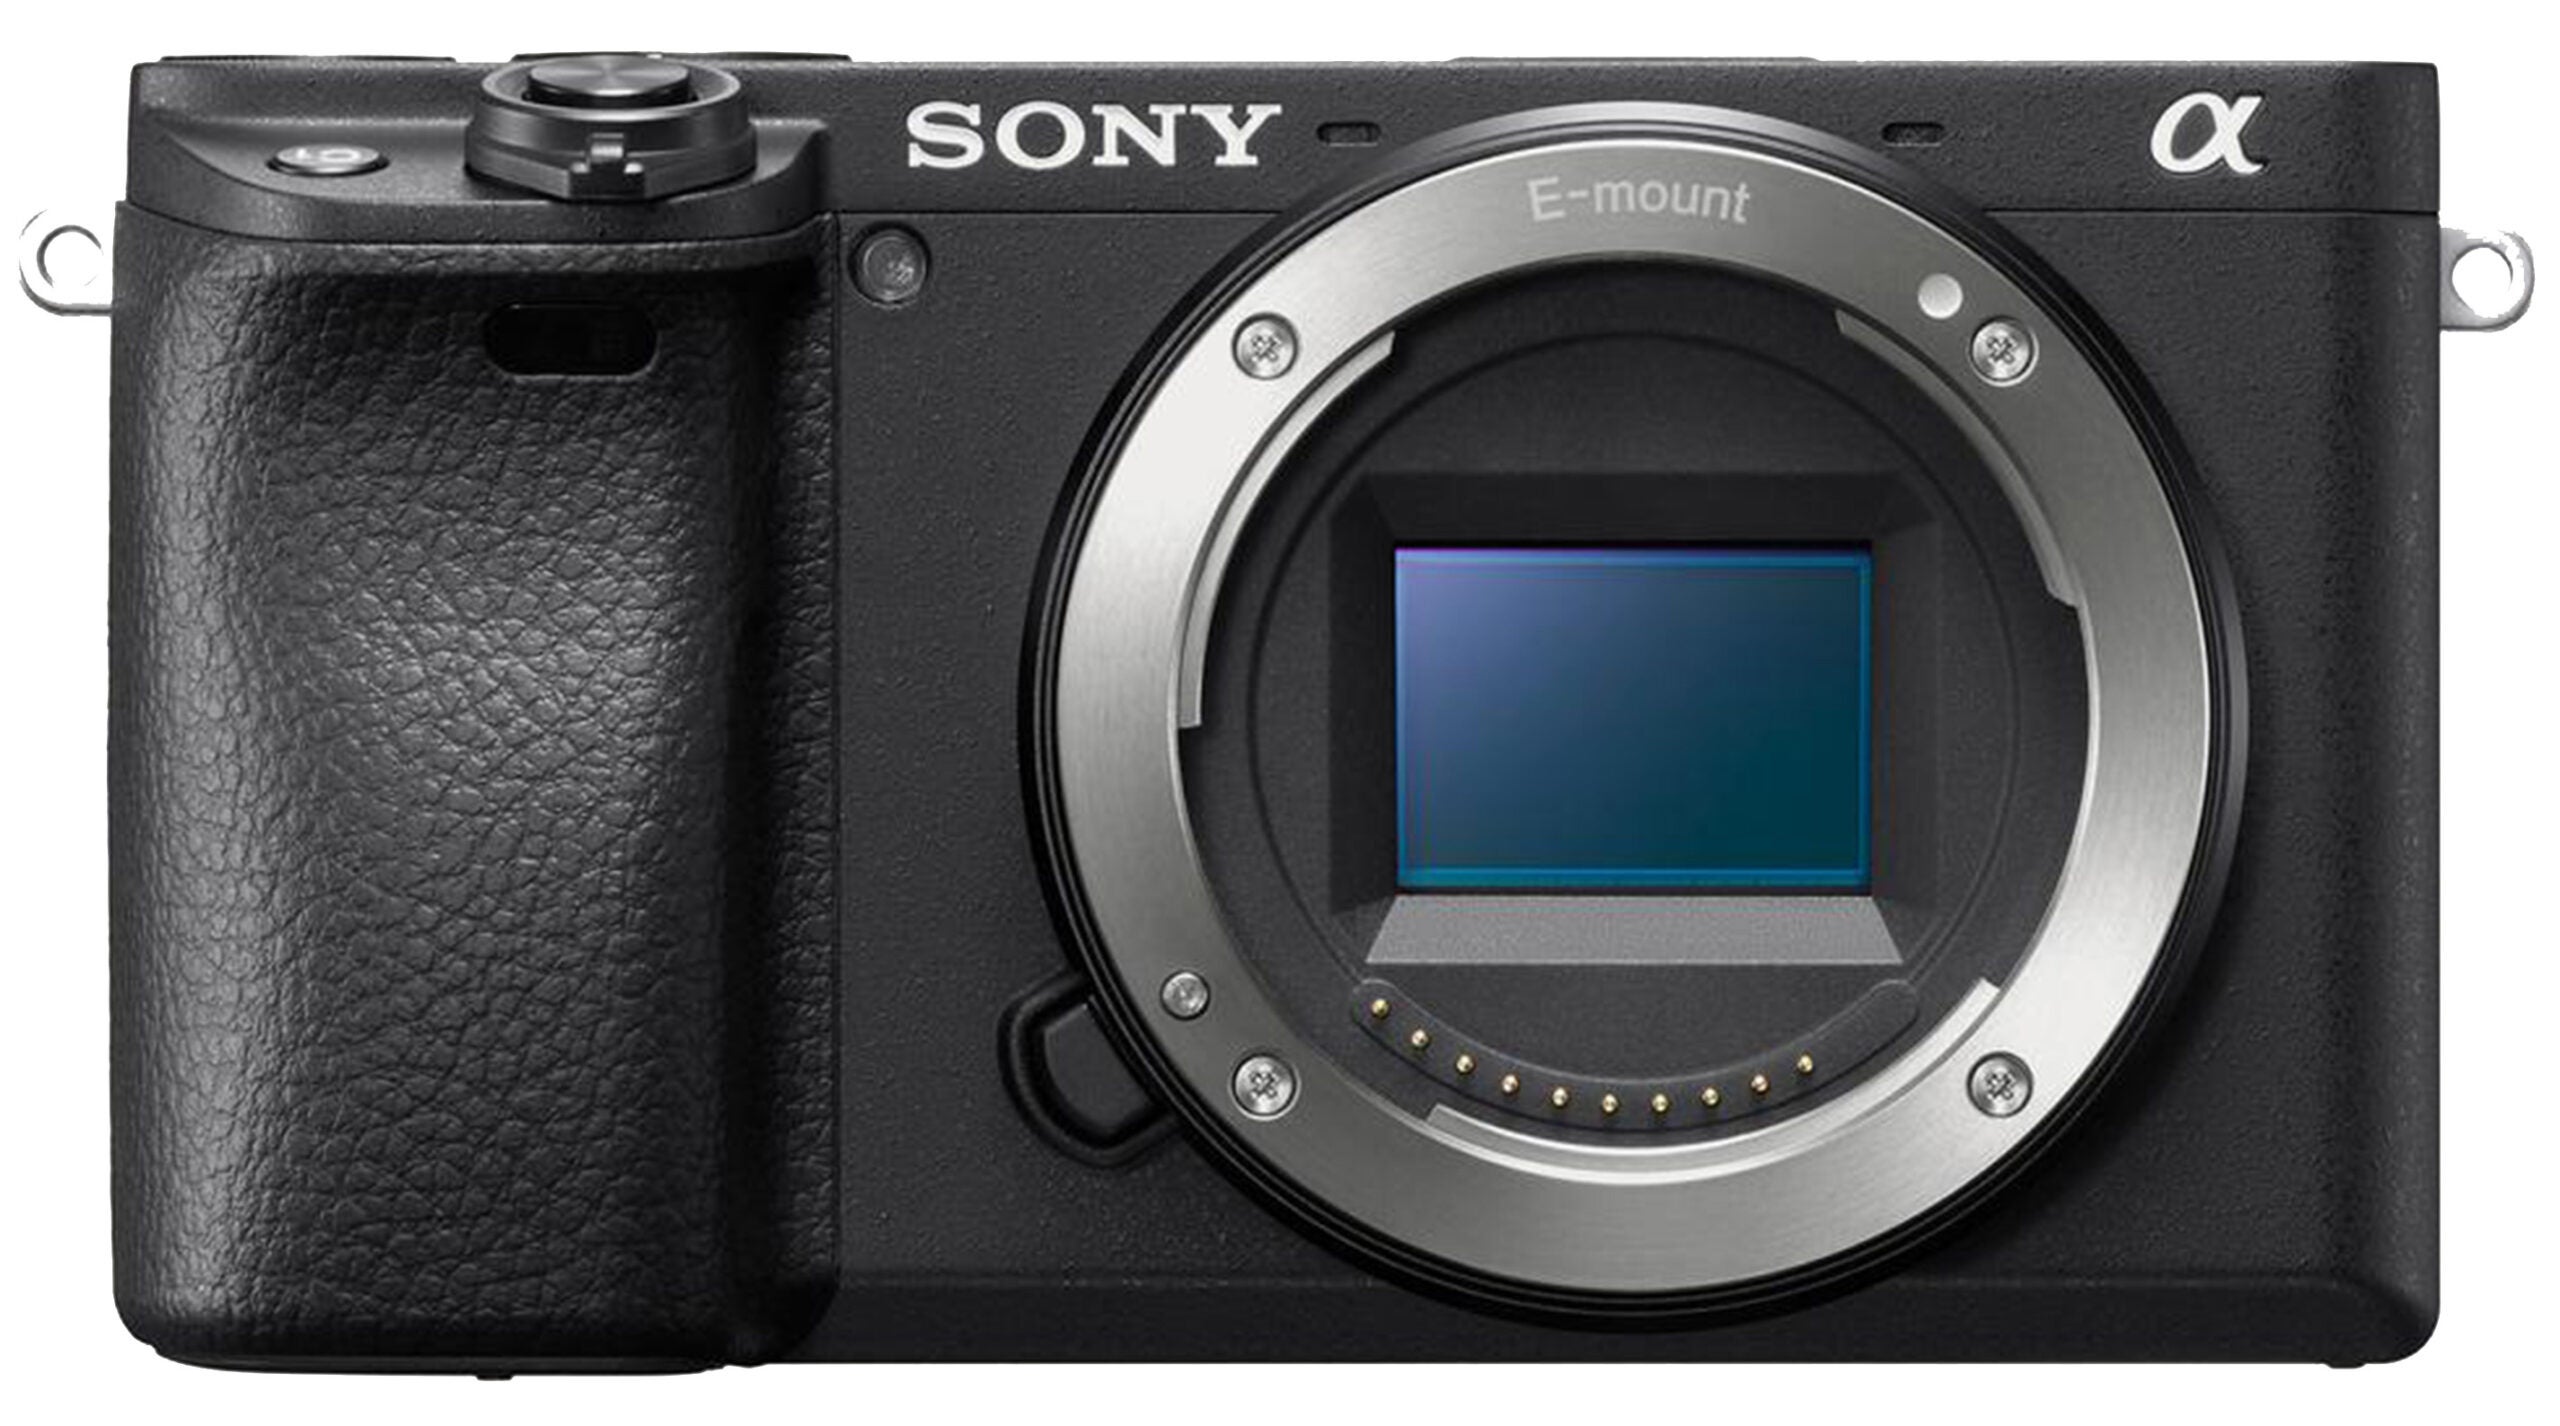 The Sony a6400